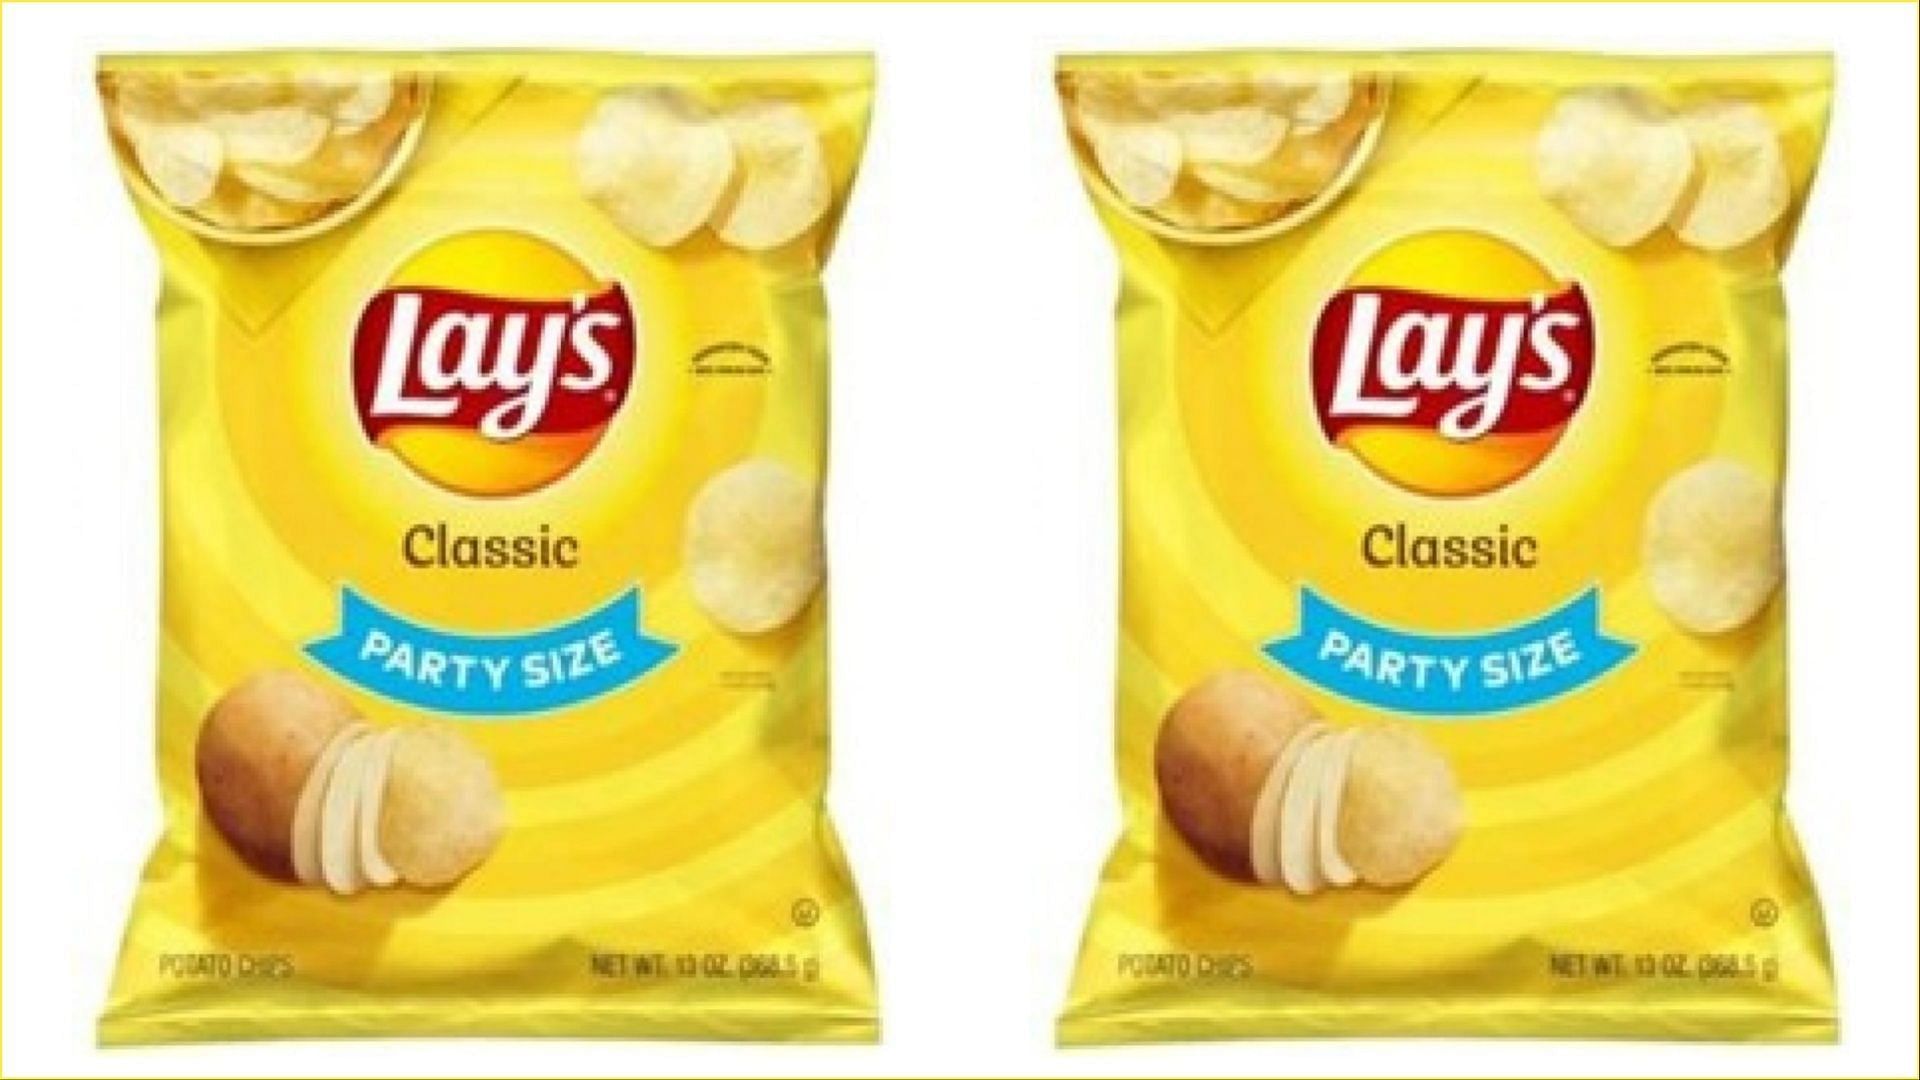 The recalled Lays Classic Party Size Potato Chips may cause life-threatening reactions in people with milk-related allergies and lactose intolerance (Image via FDA)